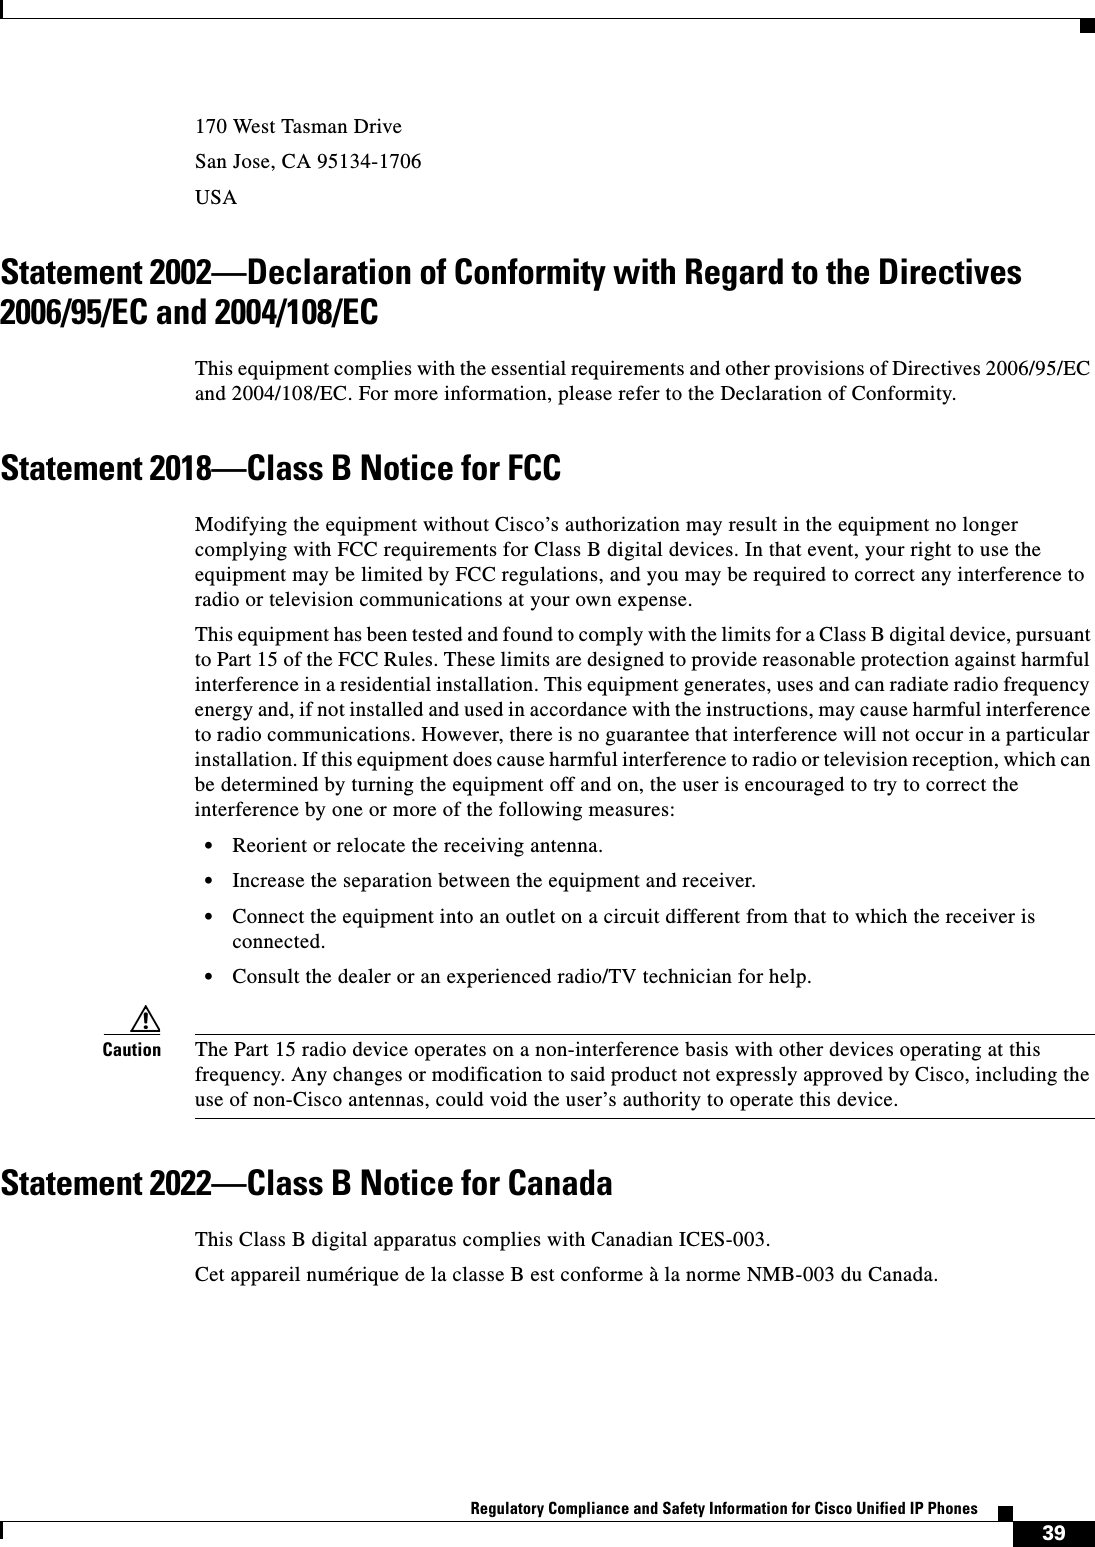  39Regulatory Compliance and Safety Information for Cisco Unified IP Phones 170 West Tasman DriveSan Jose, CA 95134-1706USAStatement 2002—Declaration of Conformity with Regard to the Directives 2006/95/EC and 2004/108/ECThis equipment complies with the essential requirements and other provisions of Directives 2006/95/EC and 2004/108/EC. For more information, please refer to the Declaration of Conformity.Statement 2018—Class B Notice for FCCModifying the equipment without Cisco’s authorization may result in the equipment no longer complying with FCC requirements for Class B digital devices. In that event, your right to use the equipment may be limited by FCC regulations, and you may be required to correct any interference to radio or television communications at your own expense.This equipment has been tested and found to comply with the limits for a Class B digital device, pursuant to Part 15 of the FCC Rules. These limits are designed to provide reasonable protection against harmful interference in a residential installation. This equipment generates, uses and can radiate radio frequency energy and, if not installed and used in accordance with the instructions, may cause harmful interference to radio communications. However, there is no guarantee that interference will not occur in a particular installation. If this equipment does cause harmful interference to radio or television reception, which can be determined by turning the equipment off and on, the user is encouraged to try to correct the interference by one or more of the following measures:•Reorient or relocate the receiving antenna.•Increase the separation between the equipment and receiver.•Connect the equipment into an outlet on a circuit different from that to which the receiver is connected.•Consult the dealer or an experienced radio/TV technician for help.Caution The Part 15 radio device operates on a non-interference basis with other devices operating at this frequency. Any changes or modification to said product not expressly approved by Cisco, including the use of non-Cisco antennas, could void the user’s authority to operate this device.Statement 2022—Class B Notice for CanadaThis Class B digital apparatus complies with Canadian ICES-003.Cet appareil numérique de la classe B est conforme à la norme NMB-003 du Canada.